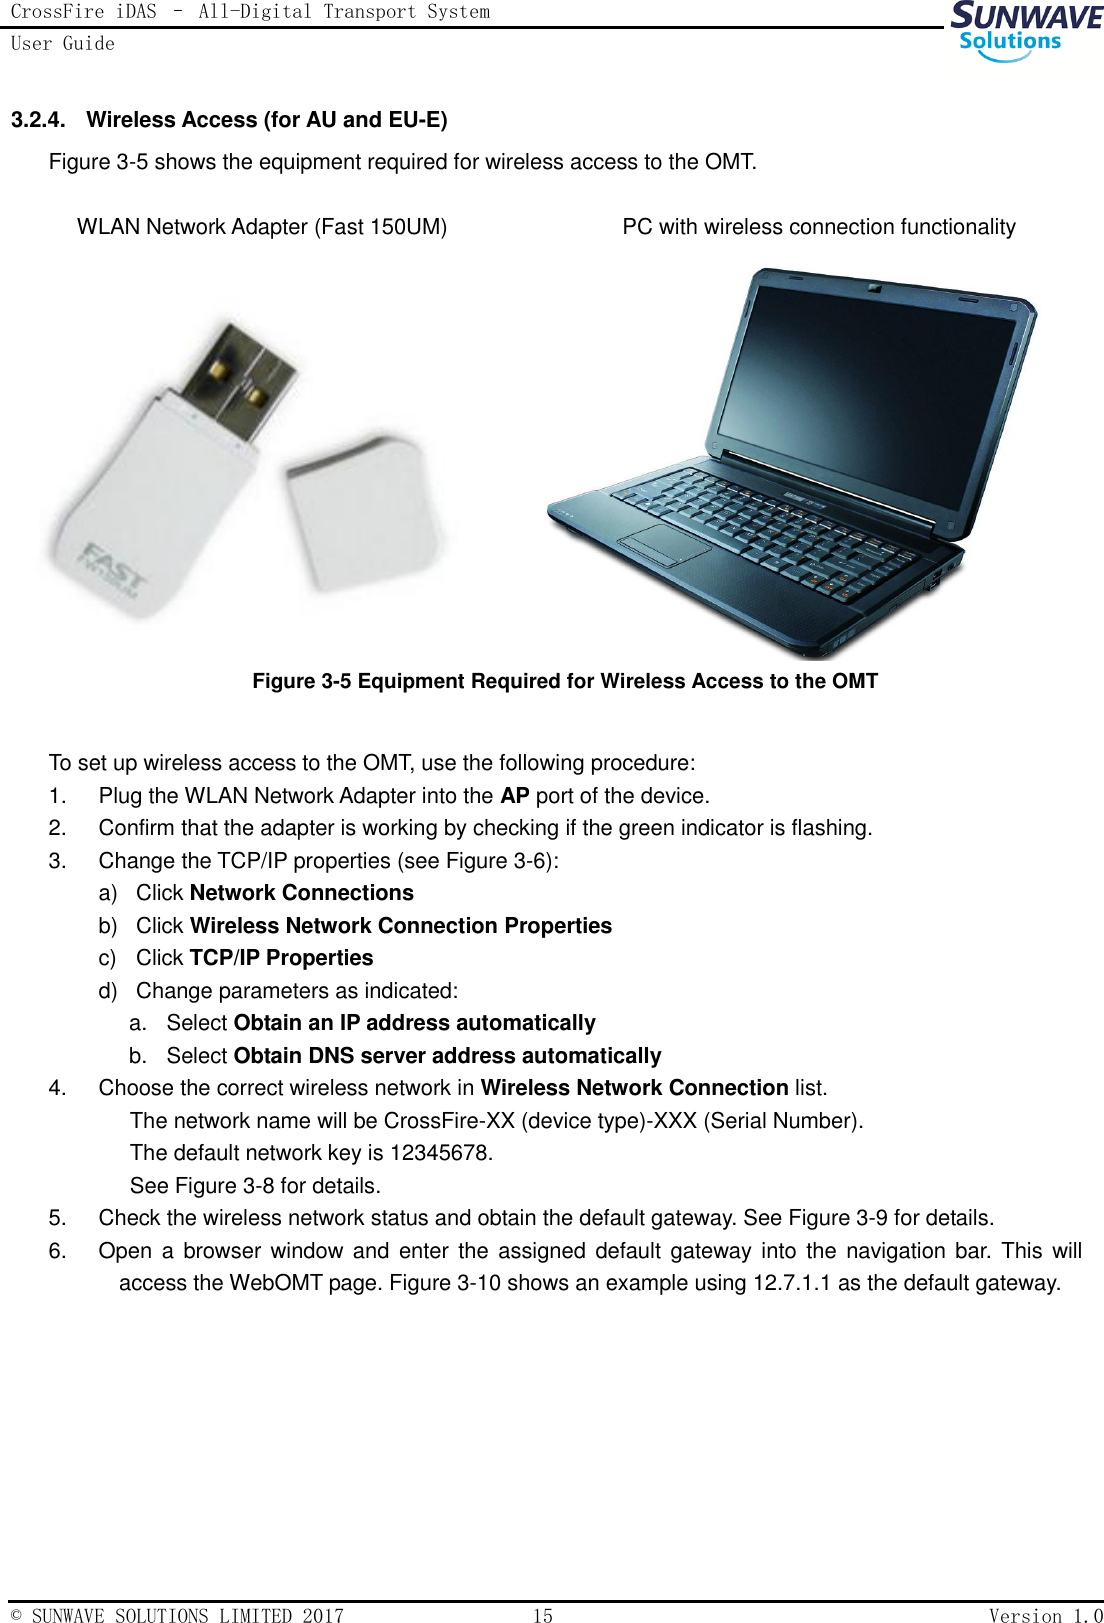 CrossFire iDAS – All-Digital Transport System User Guide   © SUNWAVE SOLUTIONS LIMITED 2017  15  Version 1.0  3.2.4.  Wireless Access (for AU and EU-E) Figure 3-5 shows the equipment required for wireless access to the OMT.  WLAN Network Adapter (Fast 150UM)                             PC with wireless connection functionality           Figure 3-5 Equipment Required for Wireless Access to the OMT                                              To set up wireless access to the OMT, use the following procedure: 1.  Plug the WLAN Network Adapter into the AP port of the device. 2.  Confirm that the adapter is working by checking if the green indicator is flashing. 3.  Change the TCP/IP properties (see Figure 3-6): a)  Click Network Connections b)  Click Wireless Network Connection Properties c)  Click TCP/IP Properties d)  Change parameters as indicated: a.  Select Obtain an IP address automatically b.  Select Obtain DNS server address automatically 4.  Choose the correct wireless network in Wireless Network Connection list. The network name will be CrossFire-XX (device type)-XXX (Serial Number).   The default network key is 12345678.   See Figure 3-8 for details. 5.  Check the wireless network status and obtain the default gateway. See Figure 3-9 for details.   6.  Open a  browser window and  enter the assigned default  gateway into  the  navigation  bar. This  will access the WebOMT page. Figure 3-10 shows an example using 12.7.1.1 as the default gateway. 